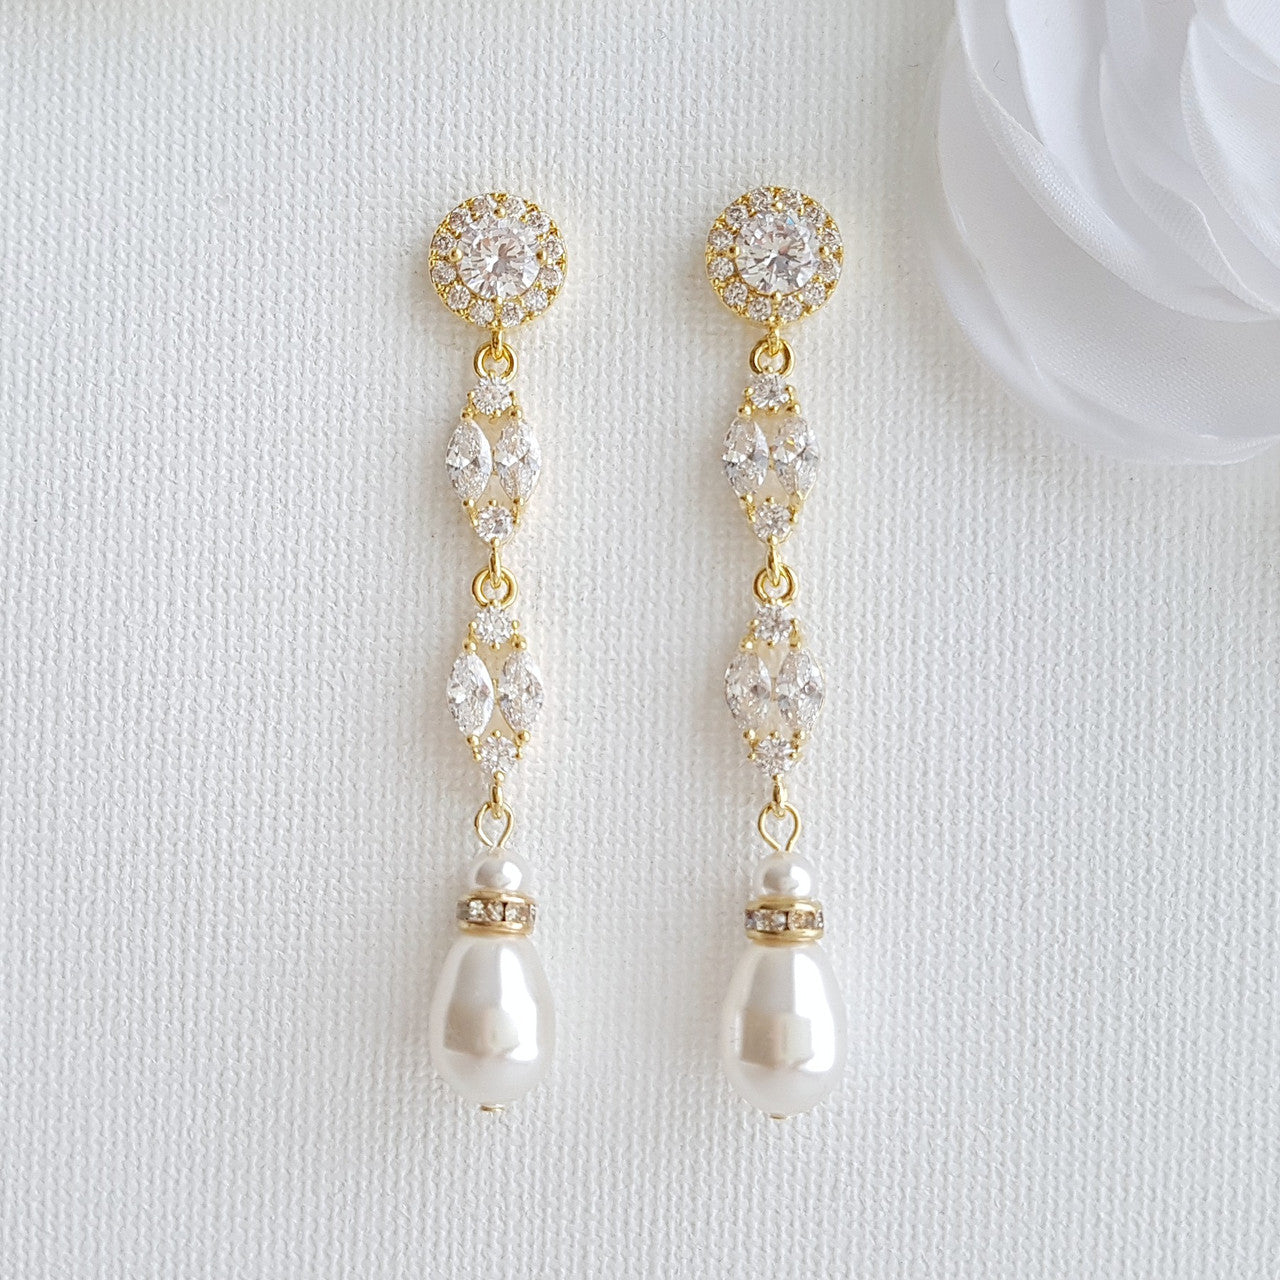 Long and Elegant Gold bridal earrings with Pearl Drop for Weddings- Poetry Designs